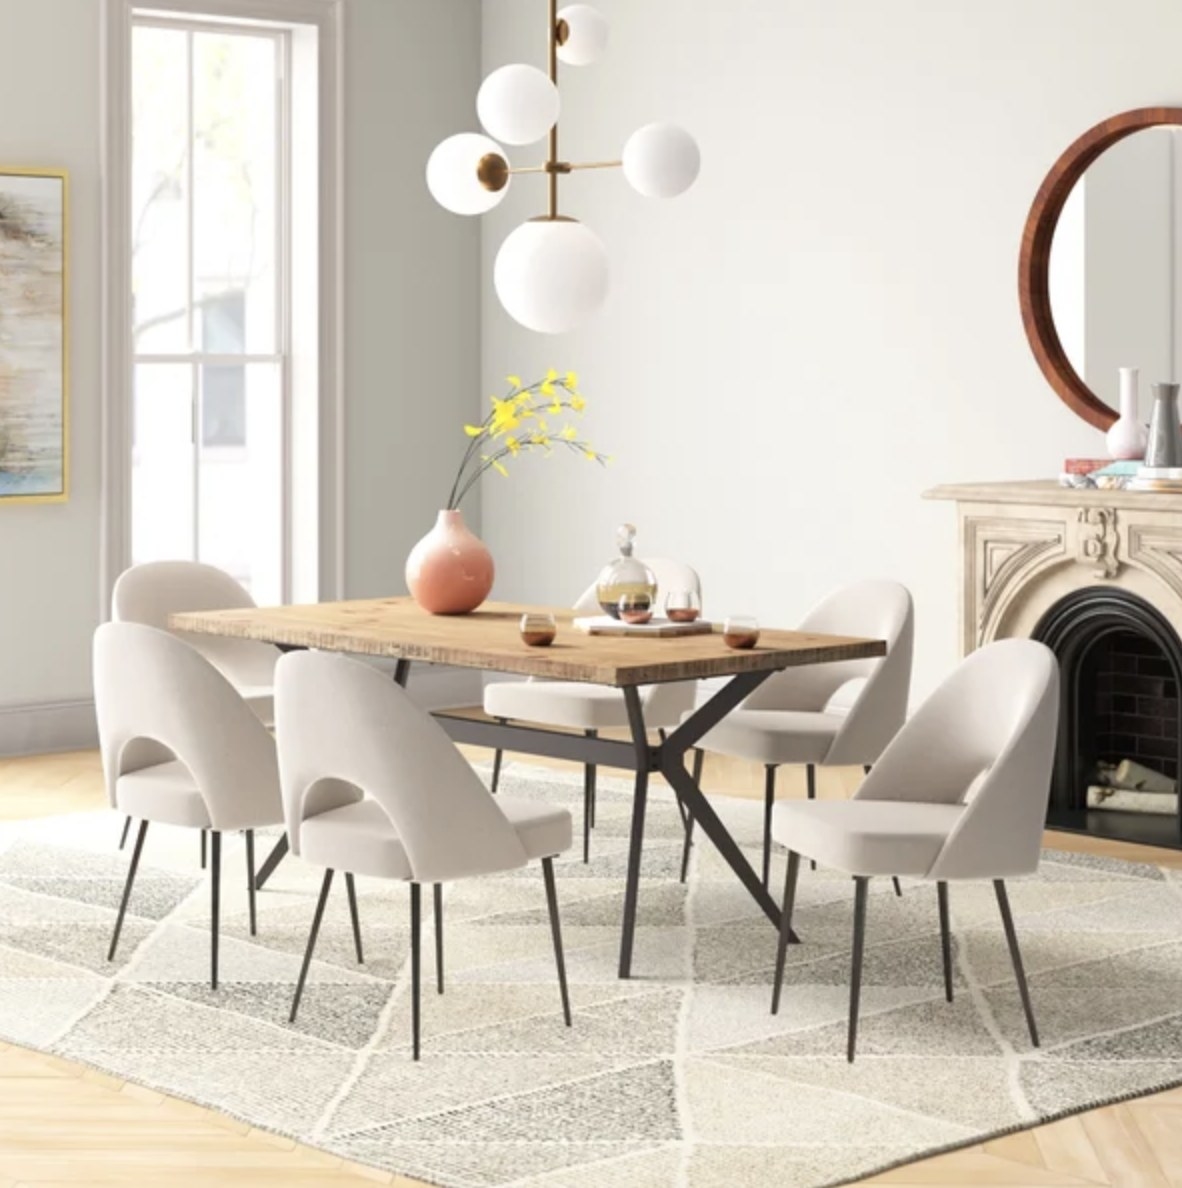 The dining set has a light wooden table and six white soft chairs